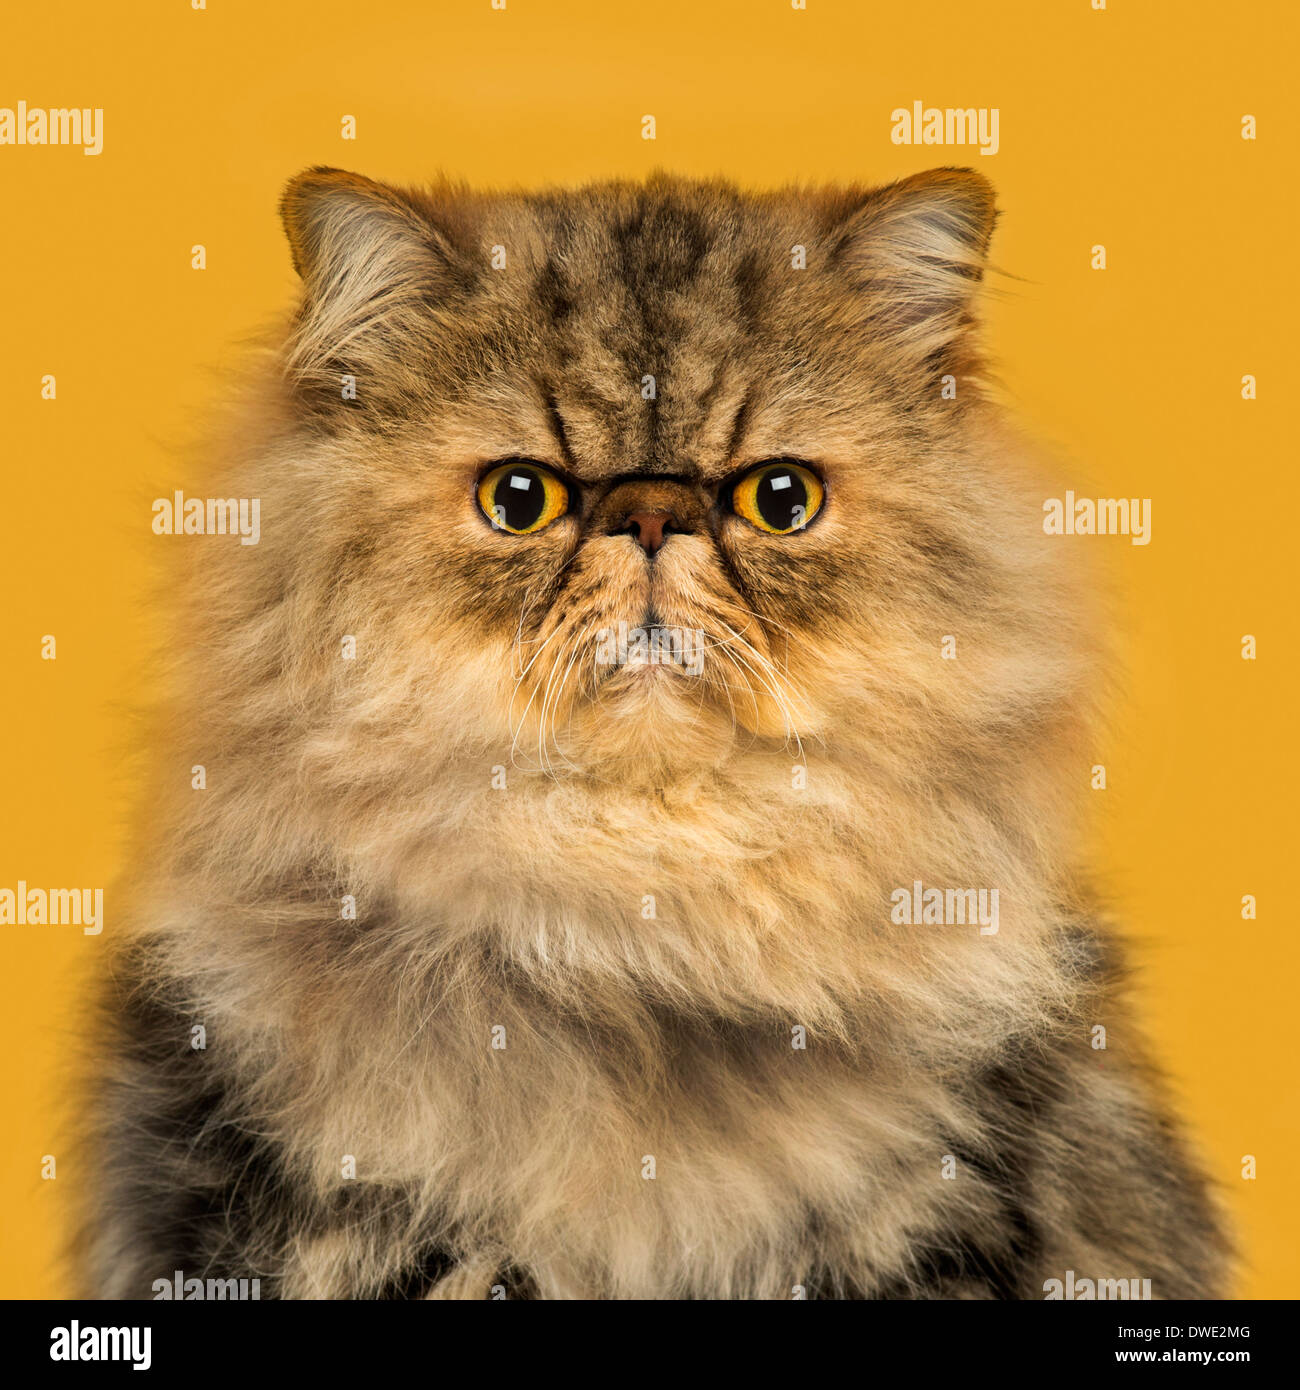 Front view of a grumpy Persian cat sitting, looking at the camera, on a orange background Stock Photo